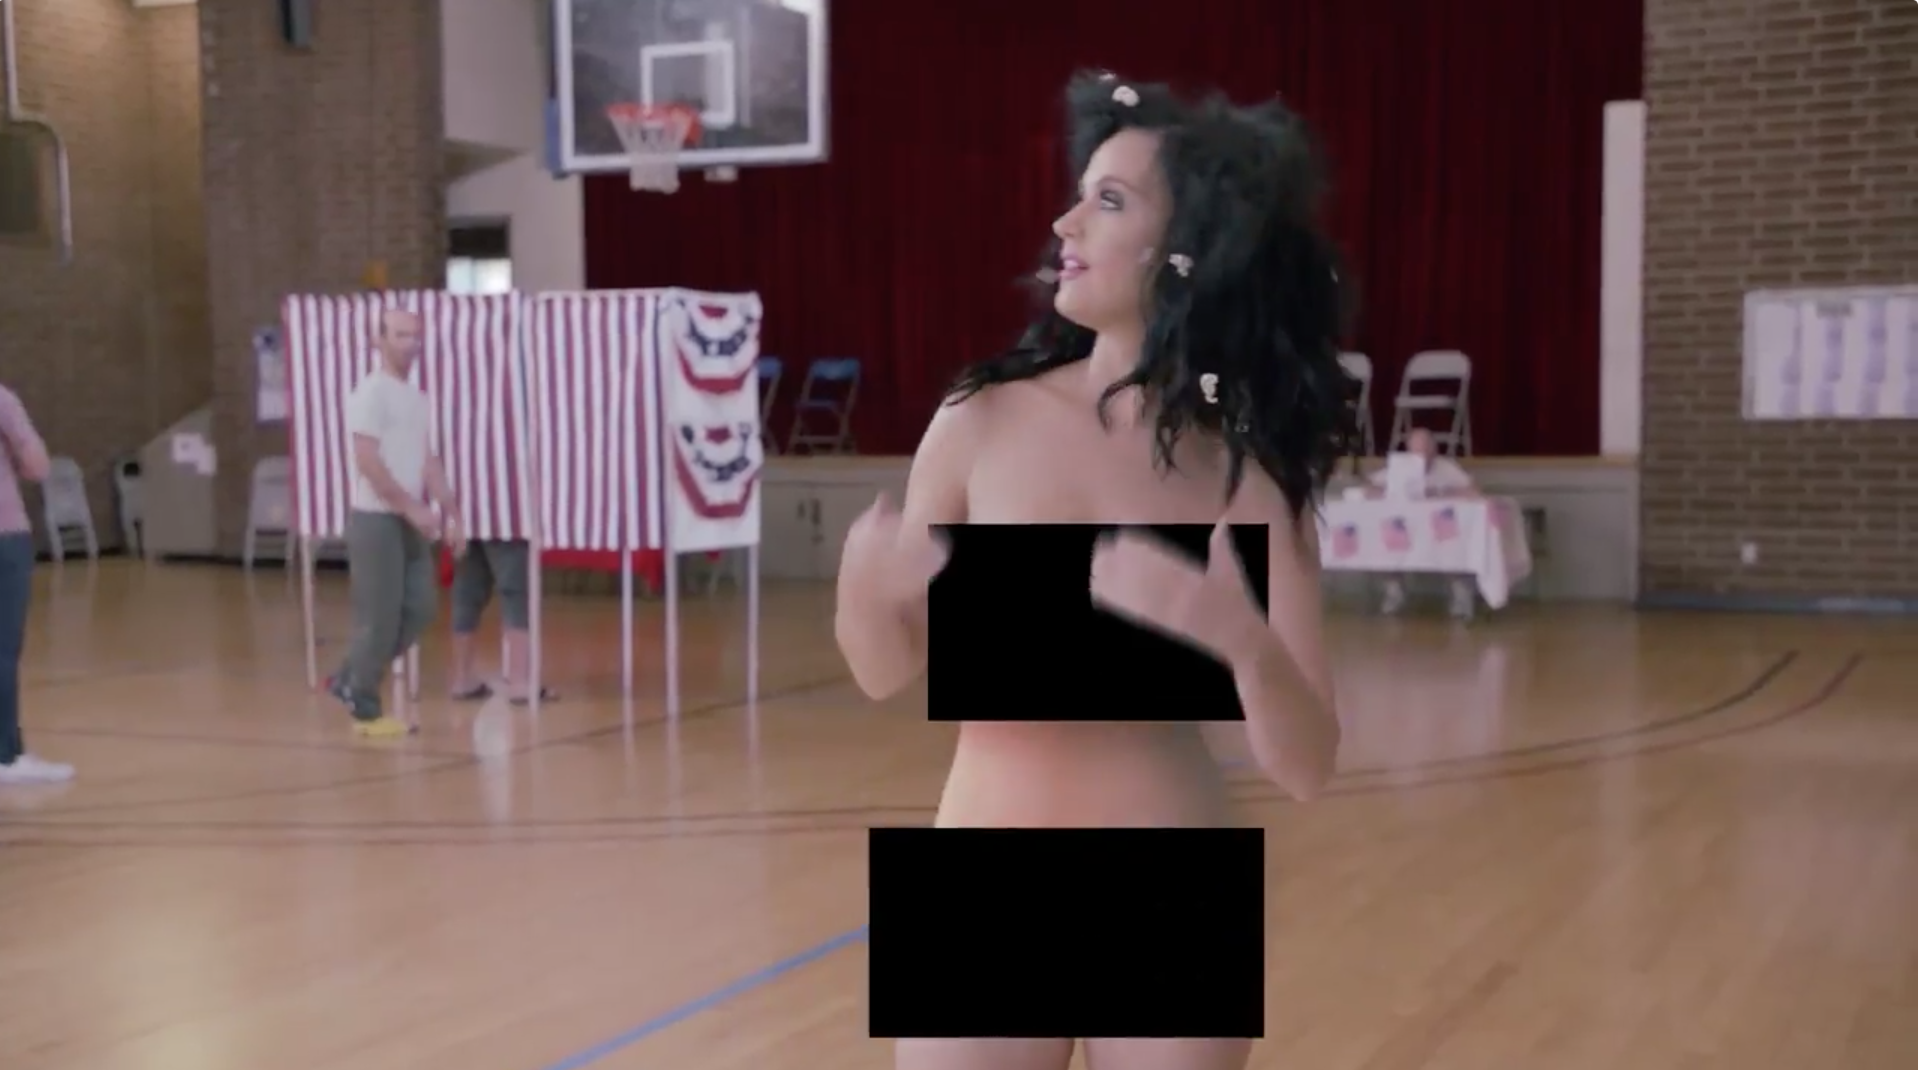 Perry uncensored katy nude #NSFW: Uncensored